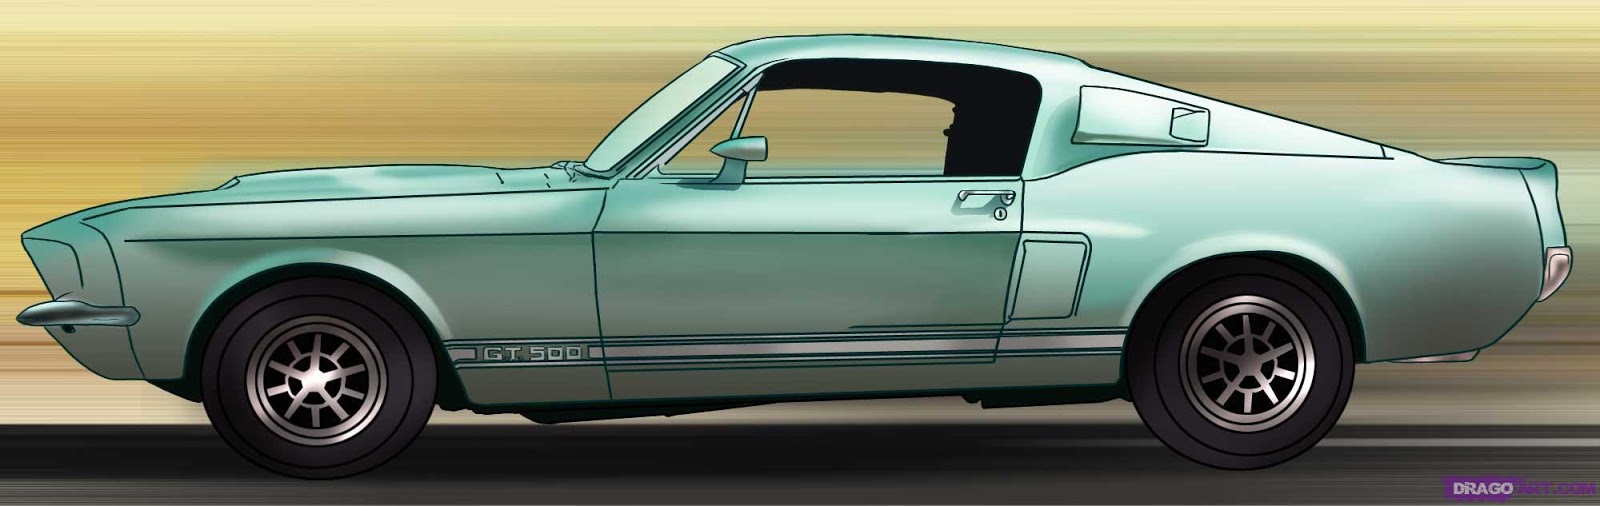 Top How To Draw A 67 Mustang of all time Learn more here 